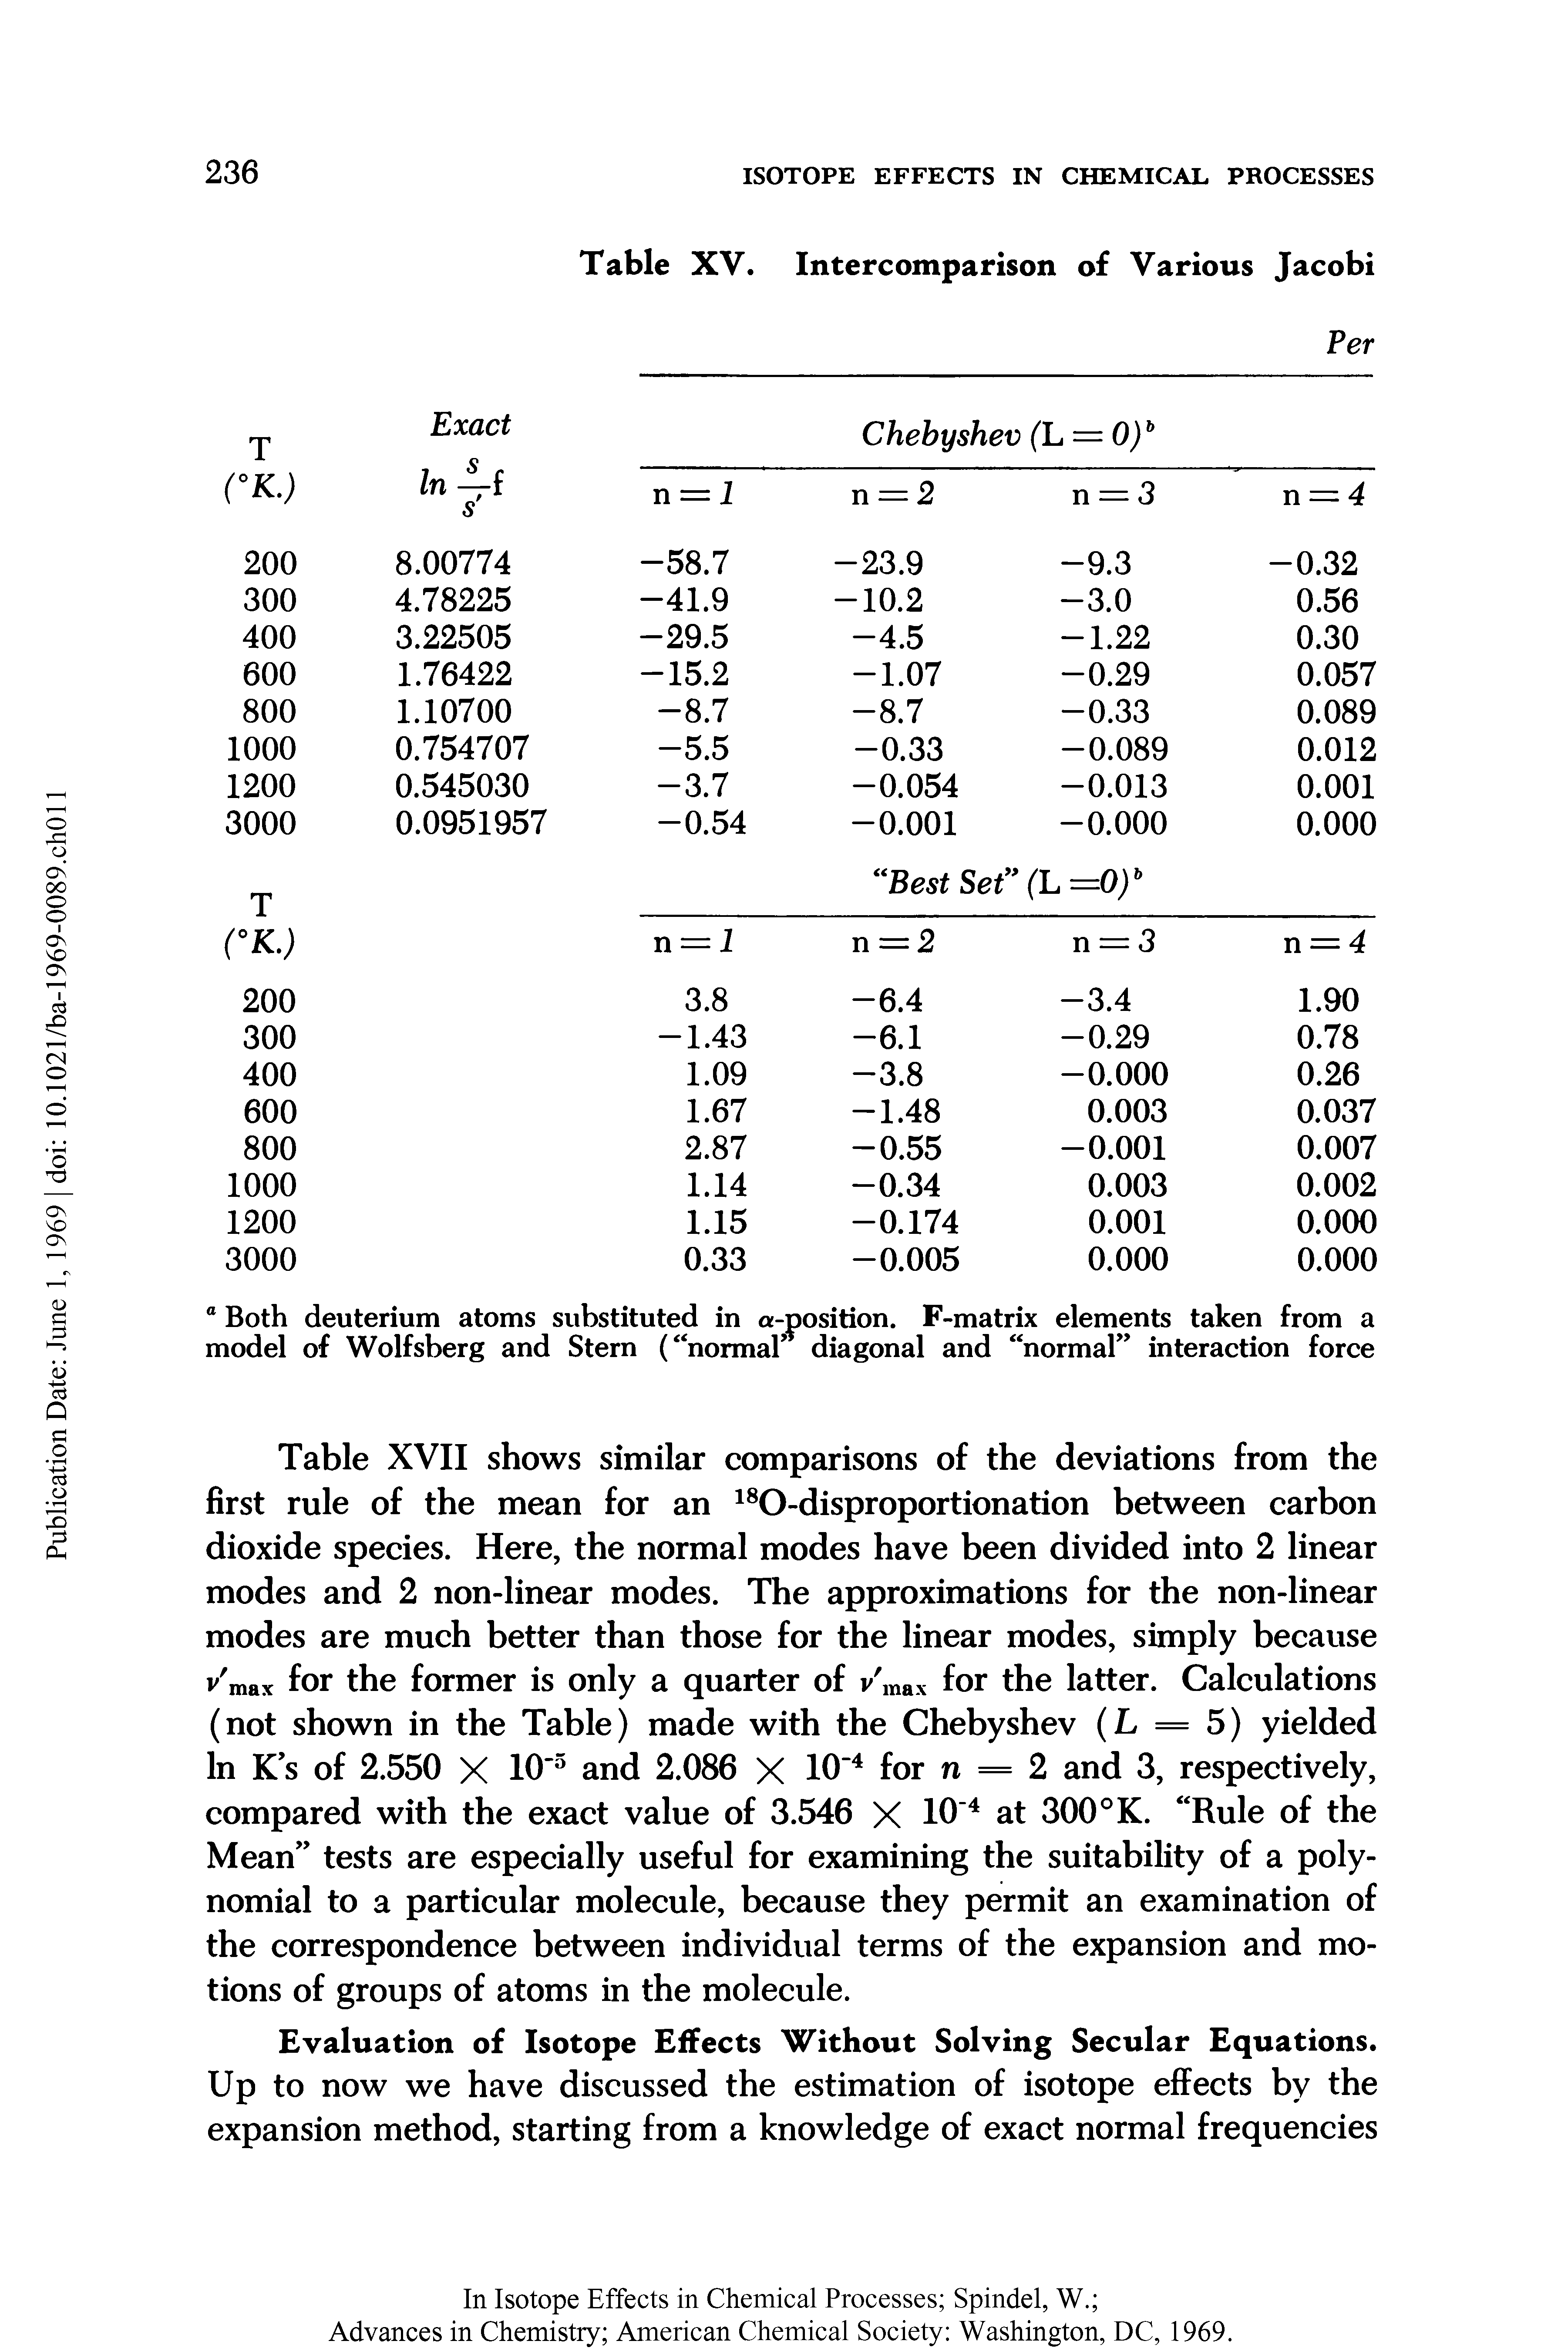 Table XVII shows similar comparisons of the deviations from the first rule of the mean for an 0-disproportionation between carbon dioxide species. Here, the normal modes have been divided into 2 linear modes and 2 non-linear modes. The approximations for the non-linear modes are much better than those for the linear modes, simply because v max for the former is only a quarter of v max for the latter. Calculations (not shown in the Table) made with the Chebyshev (L = 5) yielded In K s of 2.550 X 10 and 2.086 X 10 for n = 2 and 3, respectively, compared with the exact value of 3.546 X 10 at 300°K. Rule of the Mean tests are especially useful for examining the suitability of a polynomial to a particular molecule, because they permit an examination of the correspondence between individual terms of the expansion and motions of groups of atoms in the molecule.